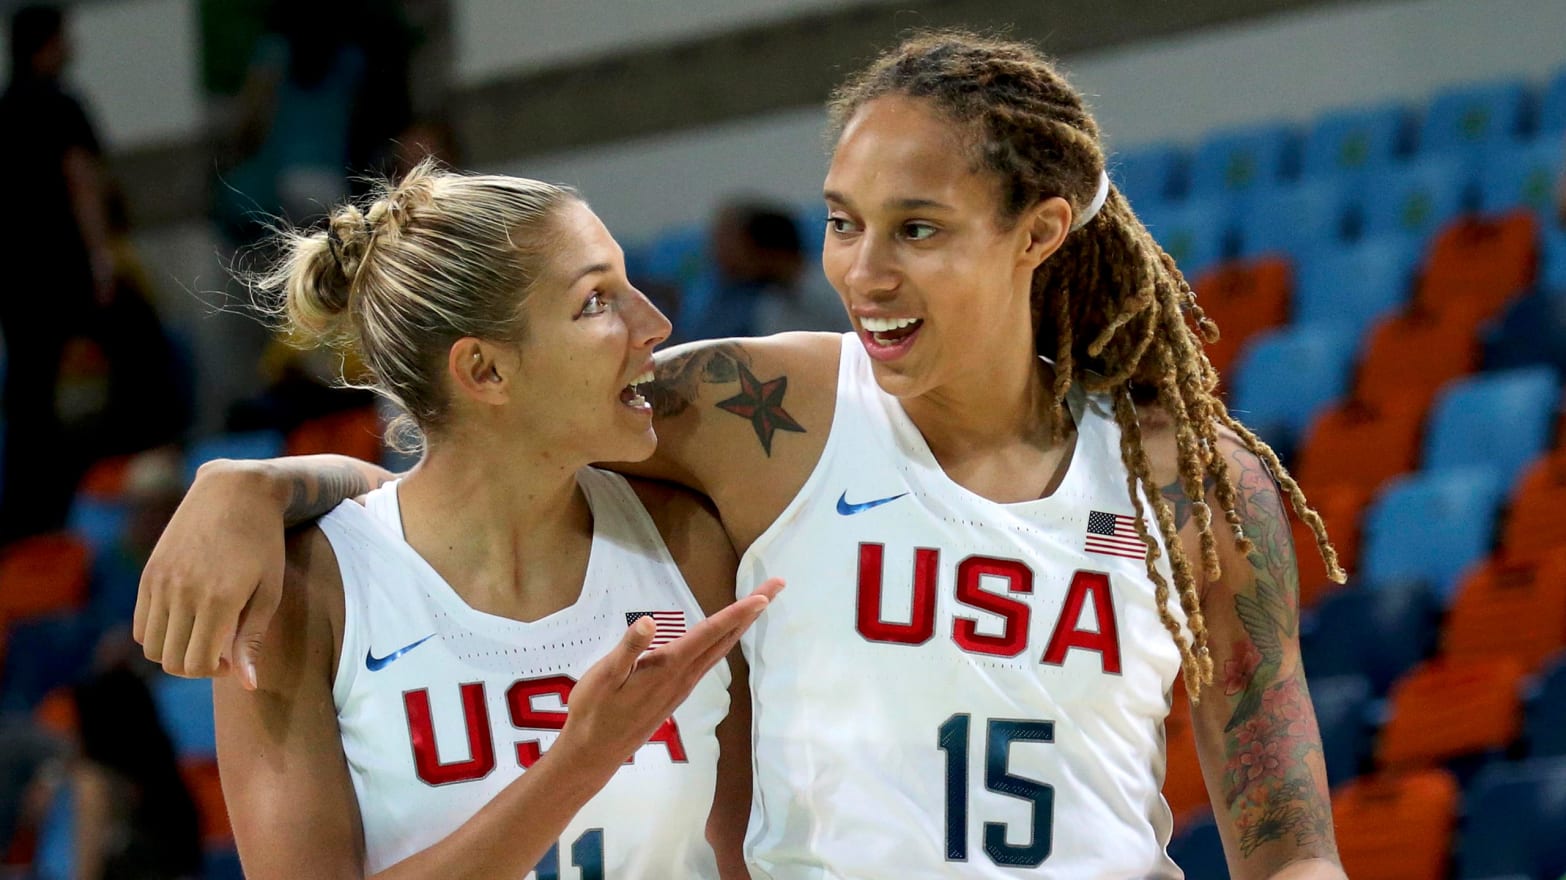 Rio Olympics 2016 How to Watch USA Womens Basketball Semifinal Live Stream Online